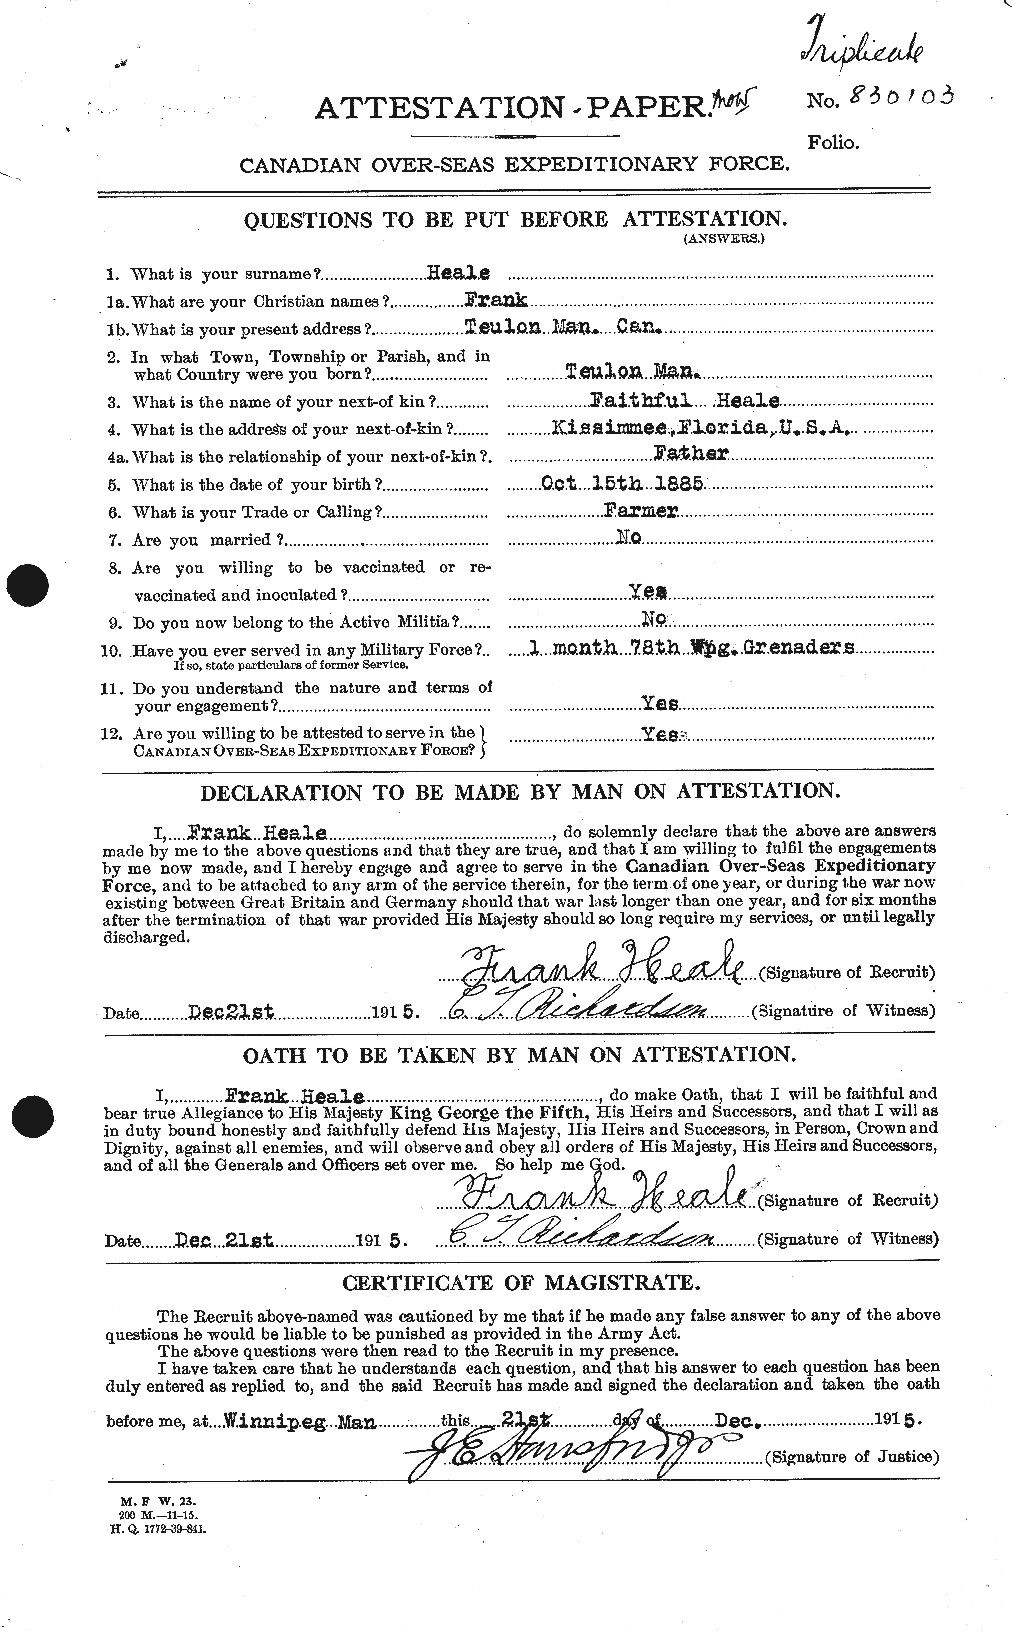 Personnel Records of the First World War - CEF 383748a